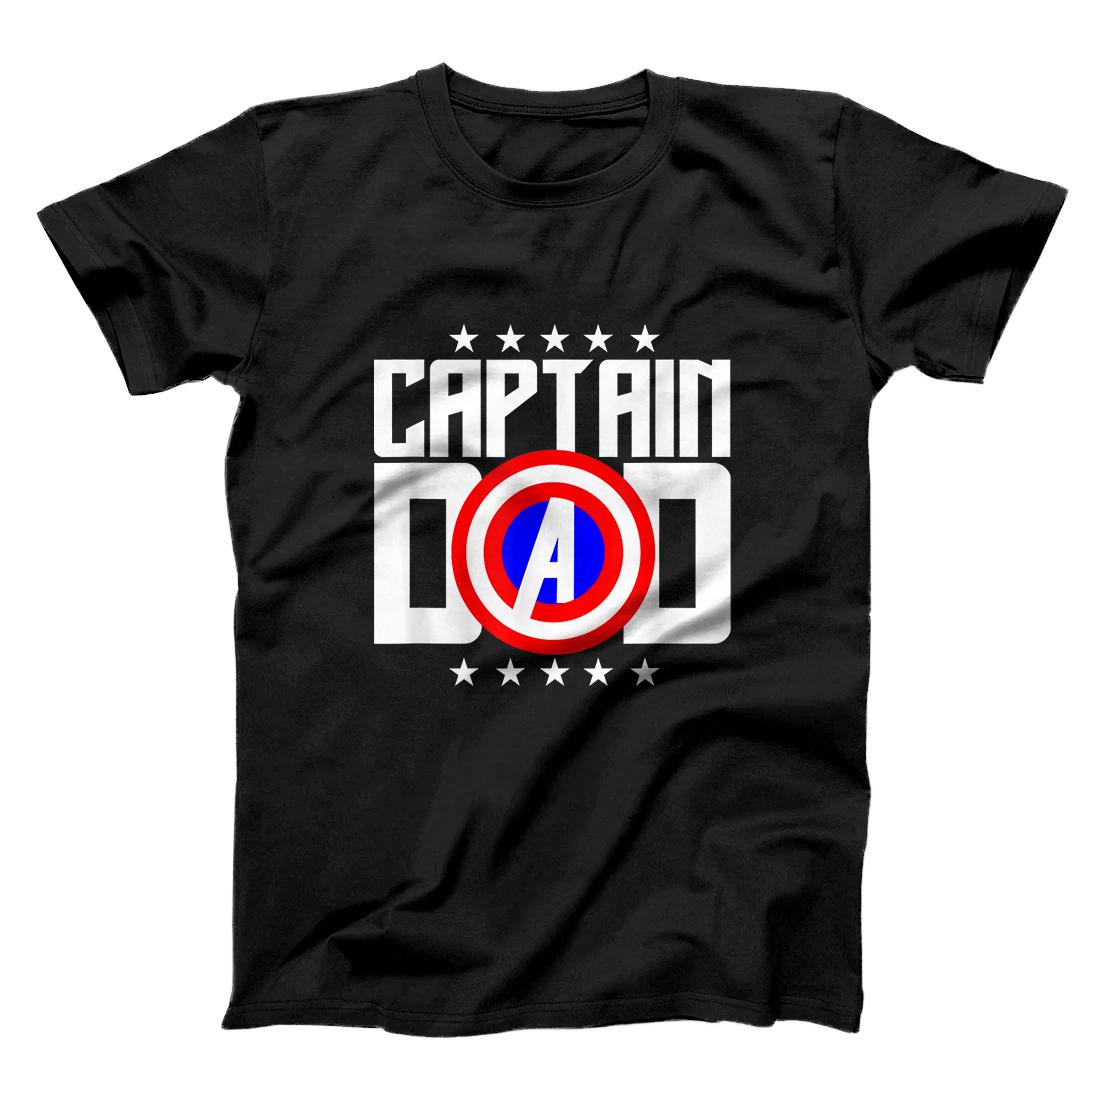 Personalized Mens Christmas Gift For Dad Birthday Captain Shield Dad Superhero T-Shirt